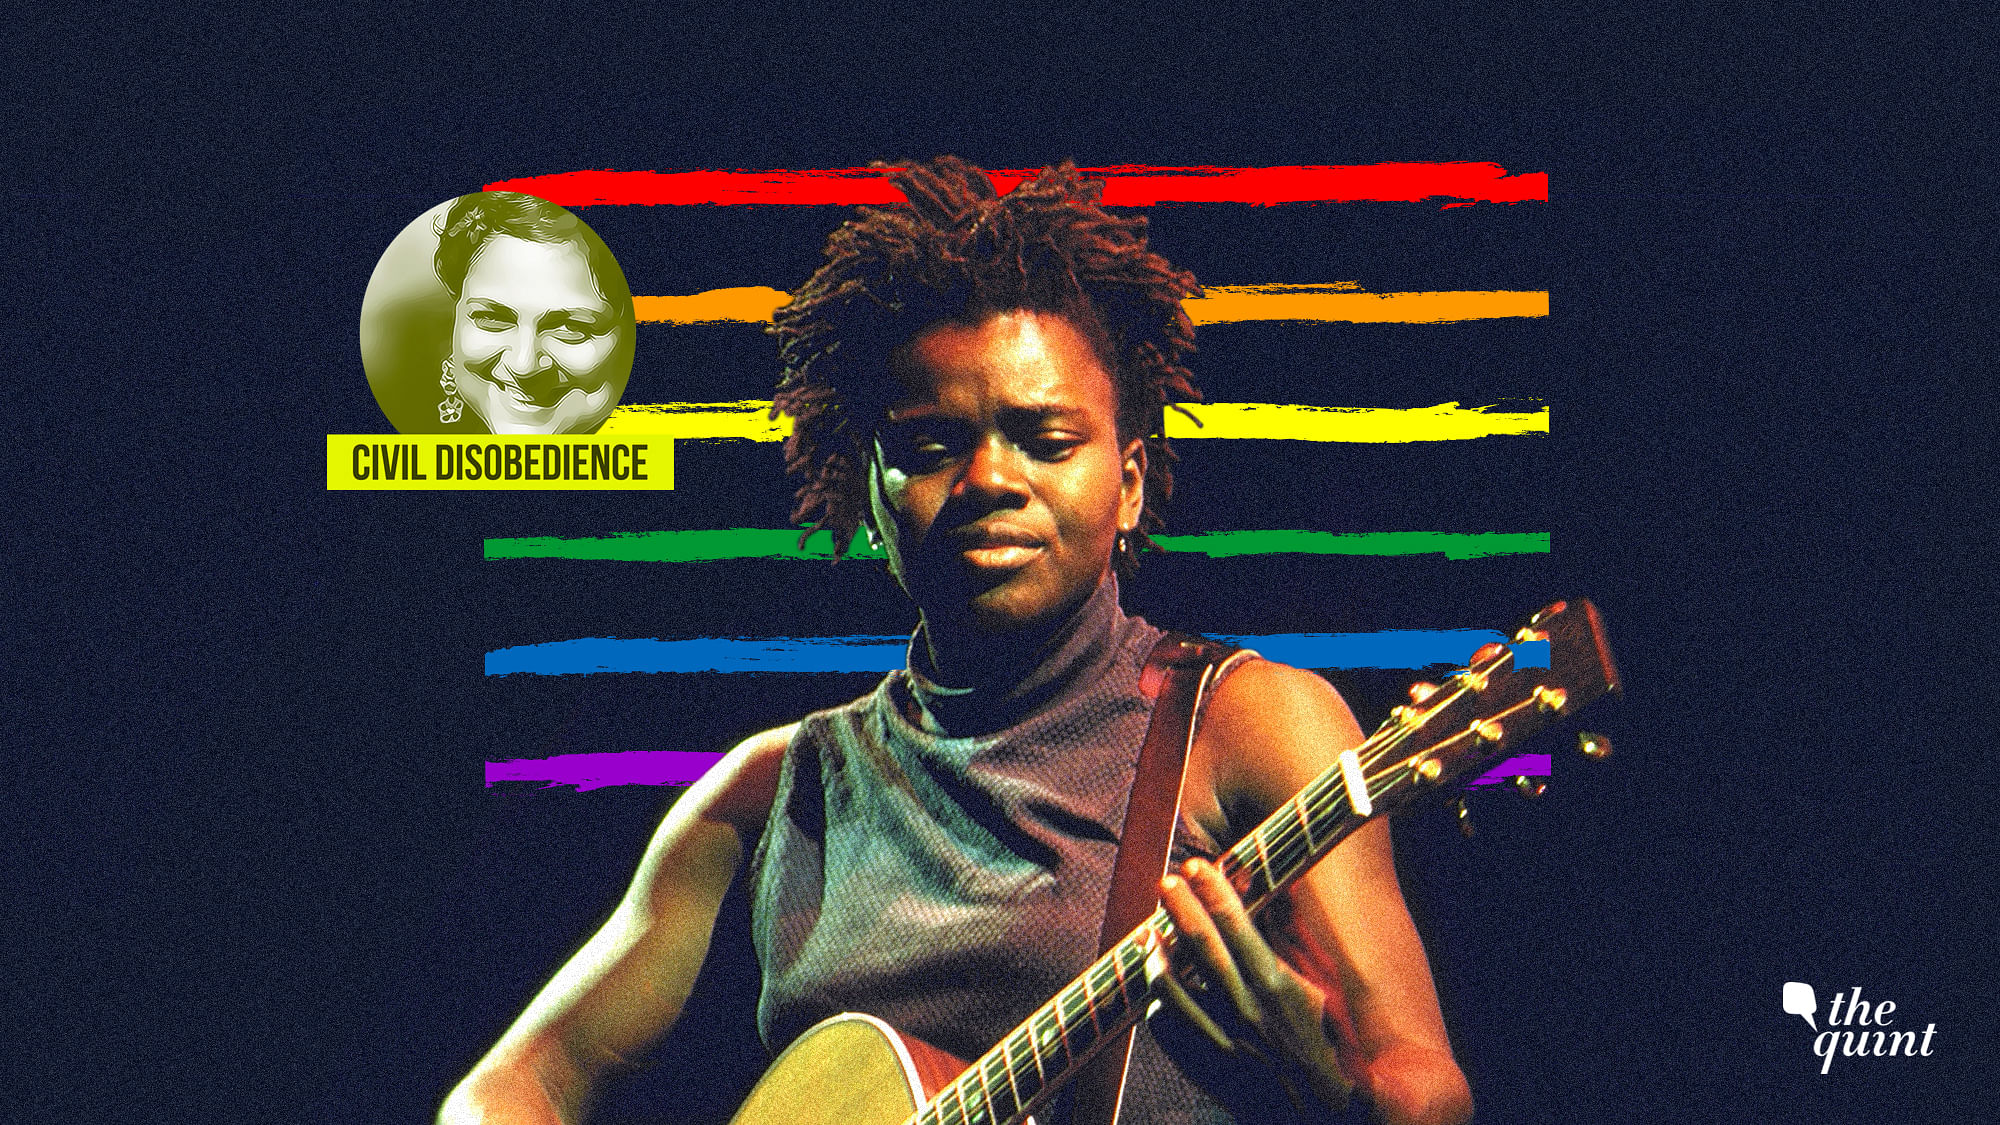 Image of iconic singer Tracy Chapman, who was gay, used for representational purposes.